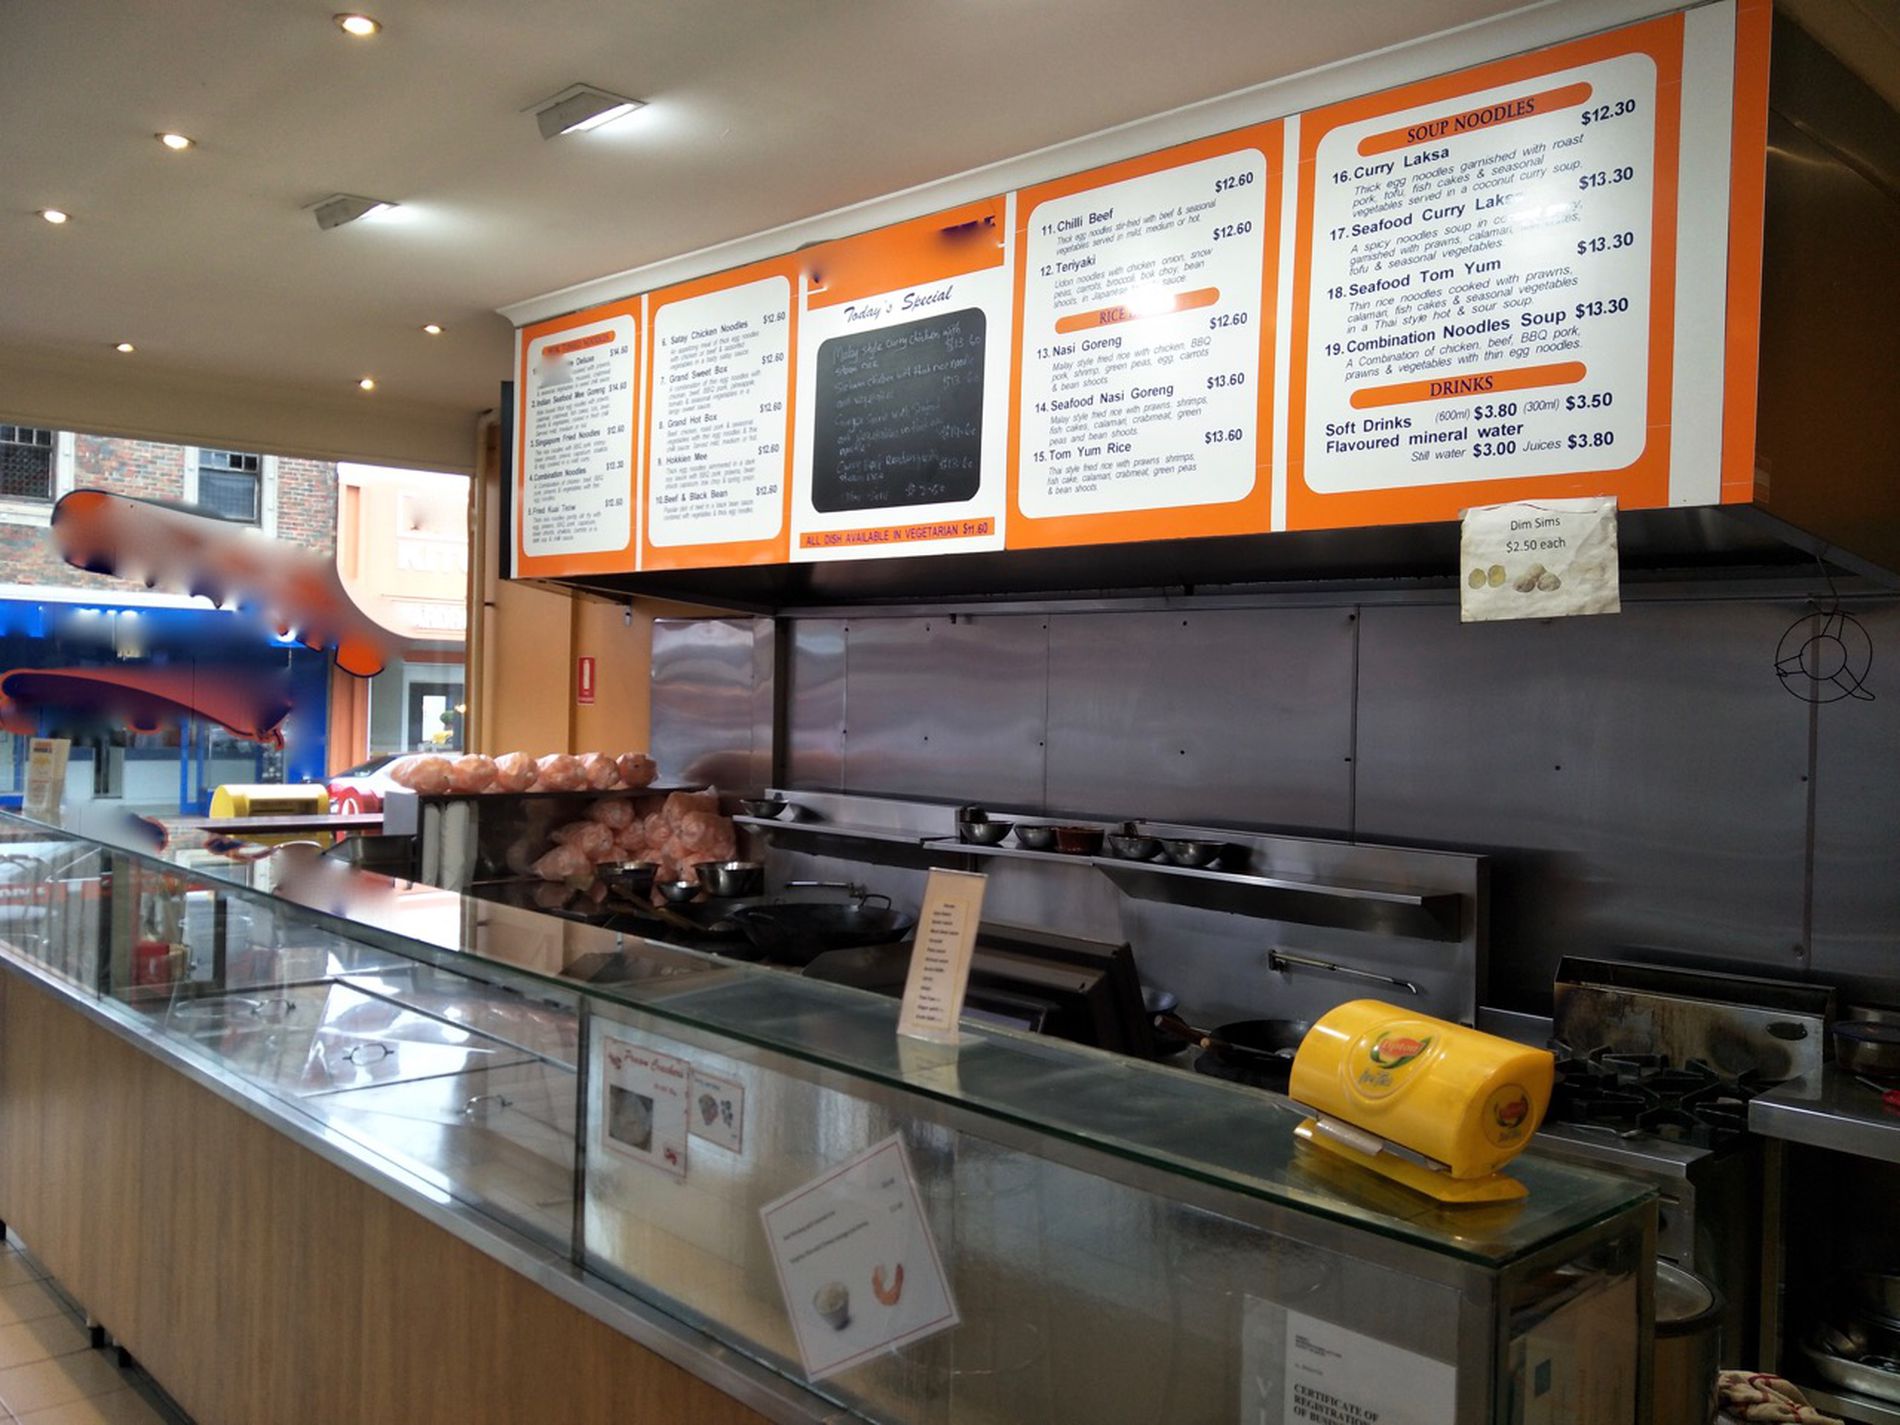 Asian Takeaway and Restaurant for Sale, Great location, Asian style kitchen